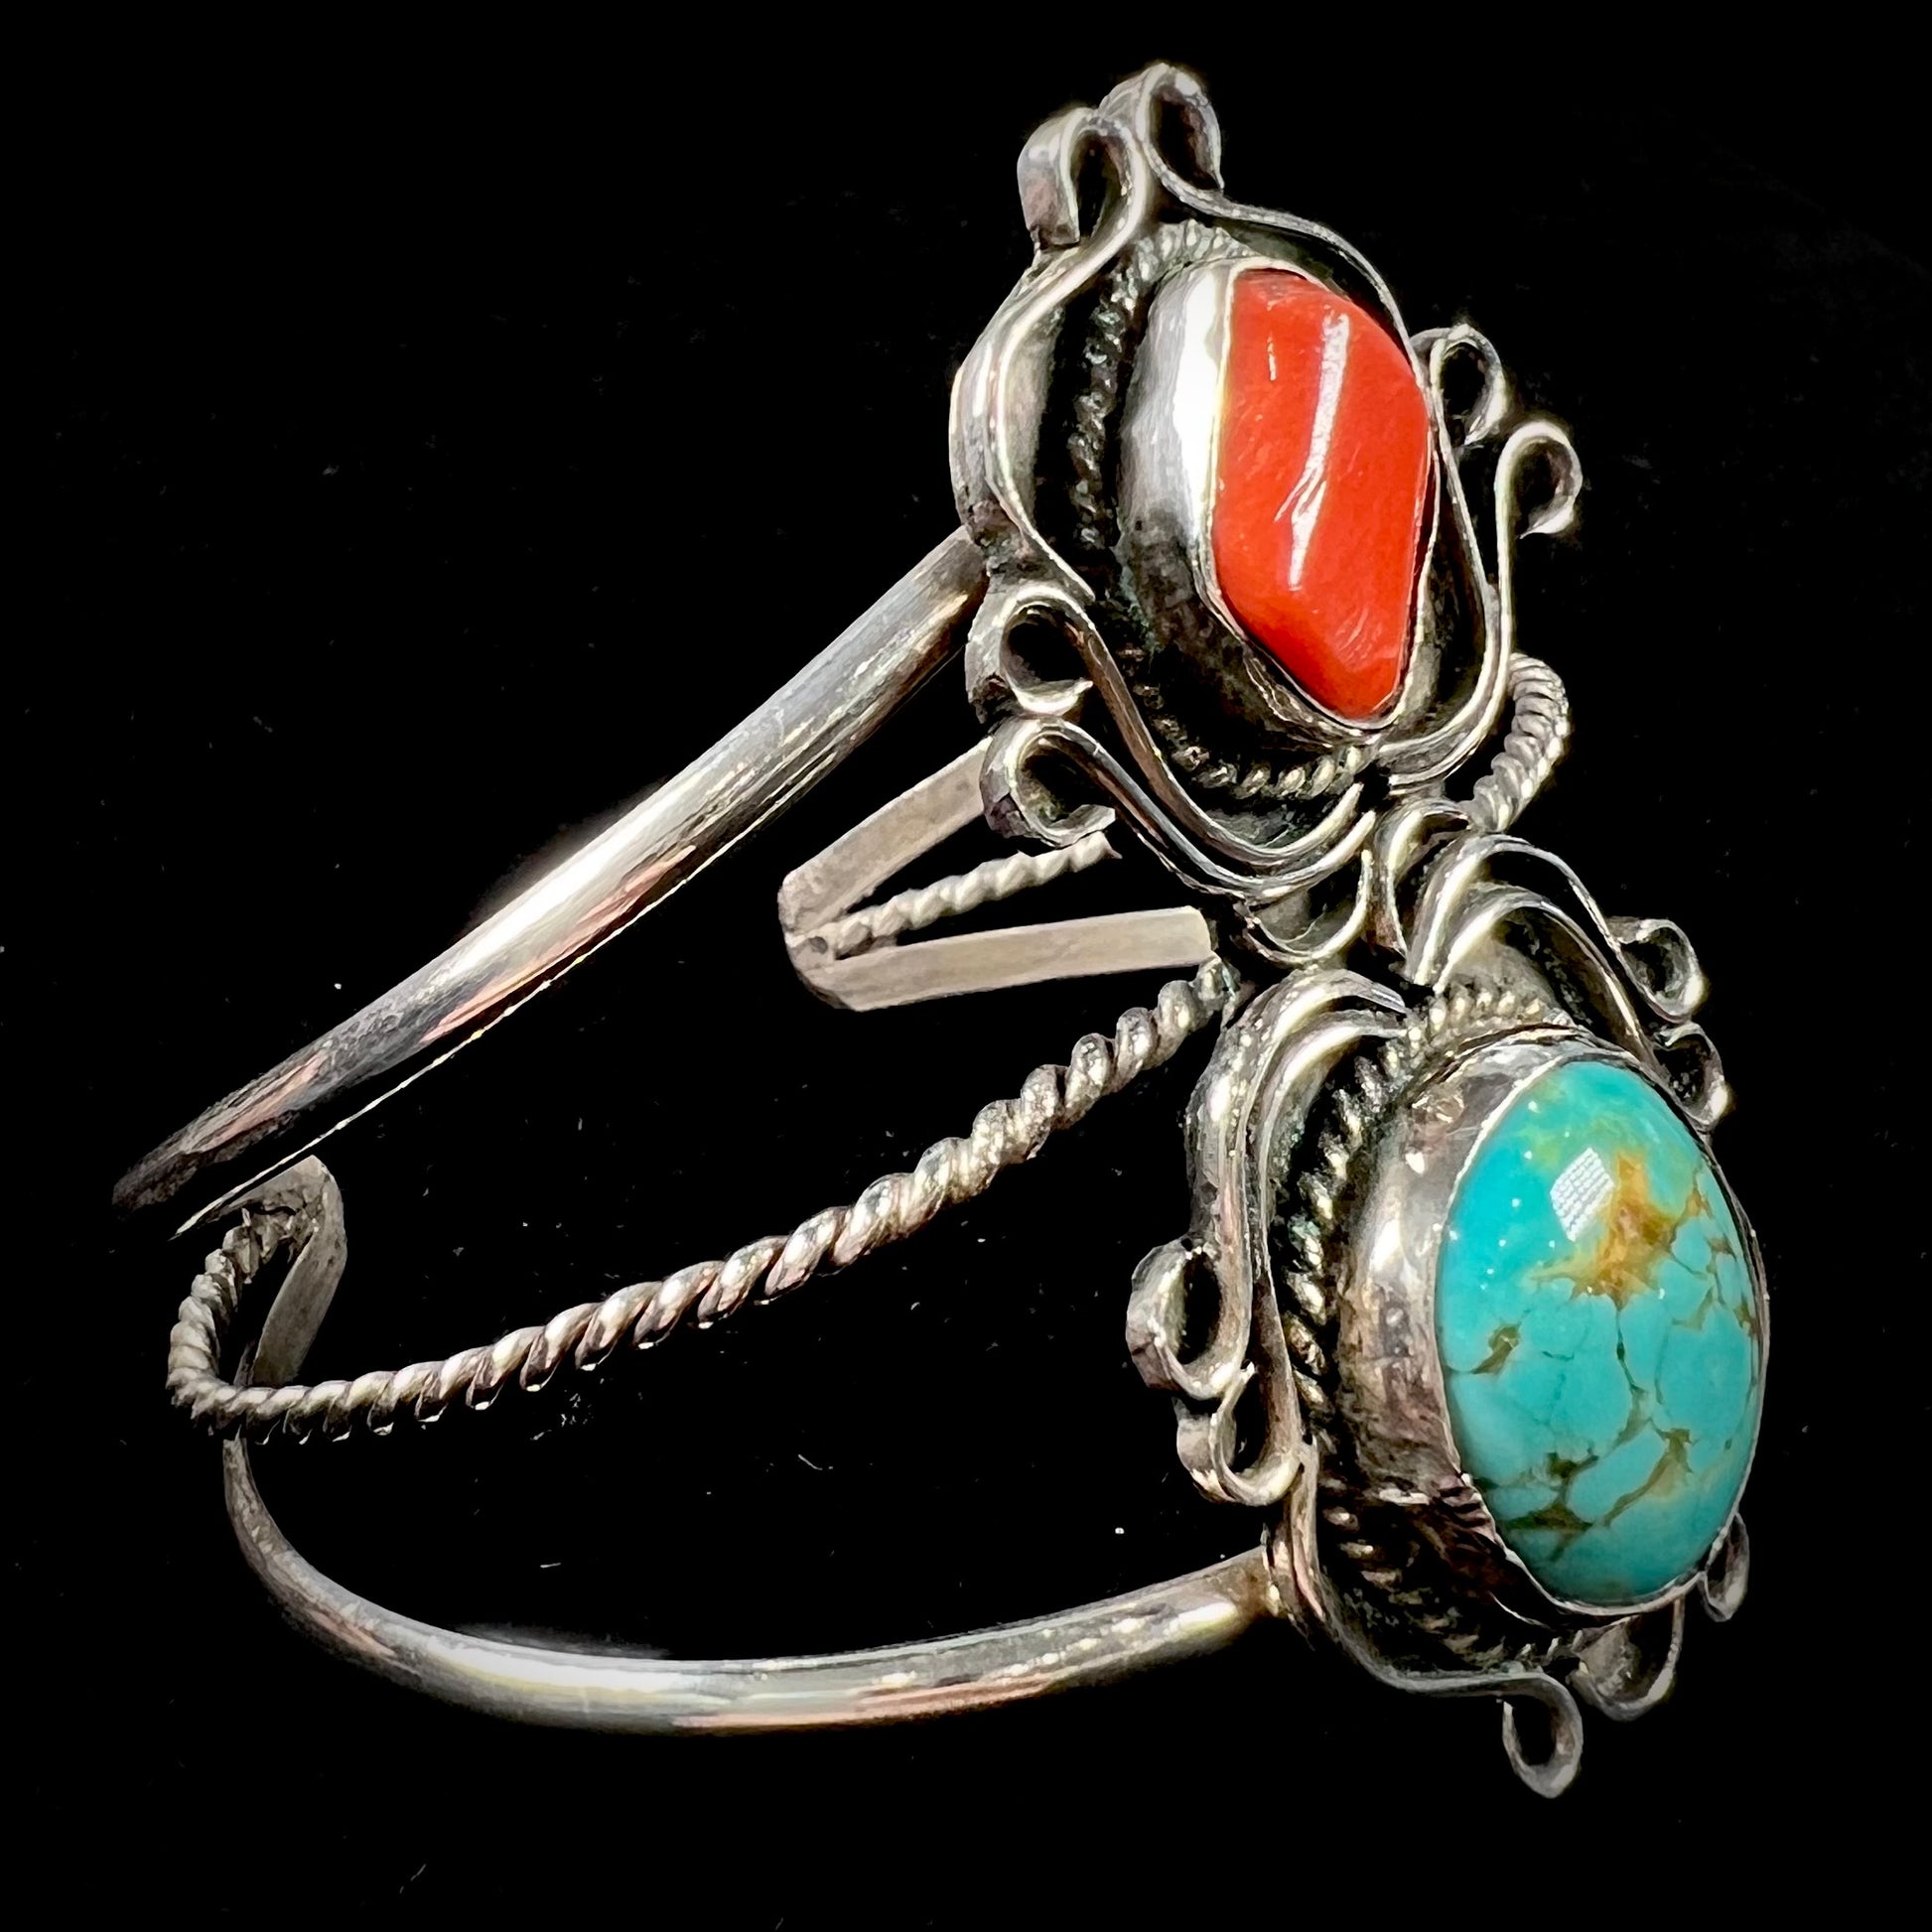 A ladies' Navajo cuff bracelet set with Royston turquoise and Mediterranean coral stones.